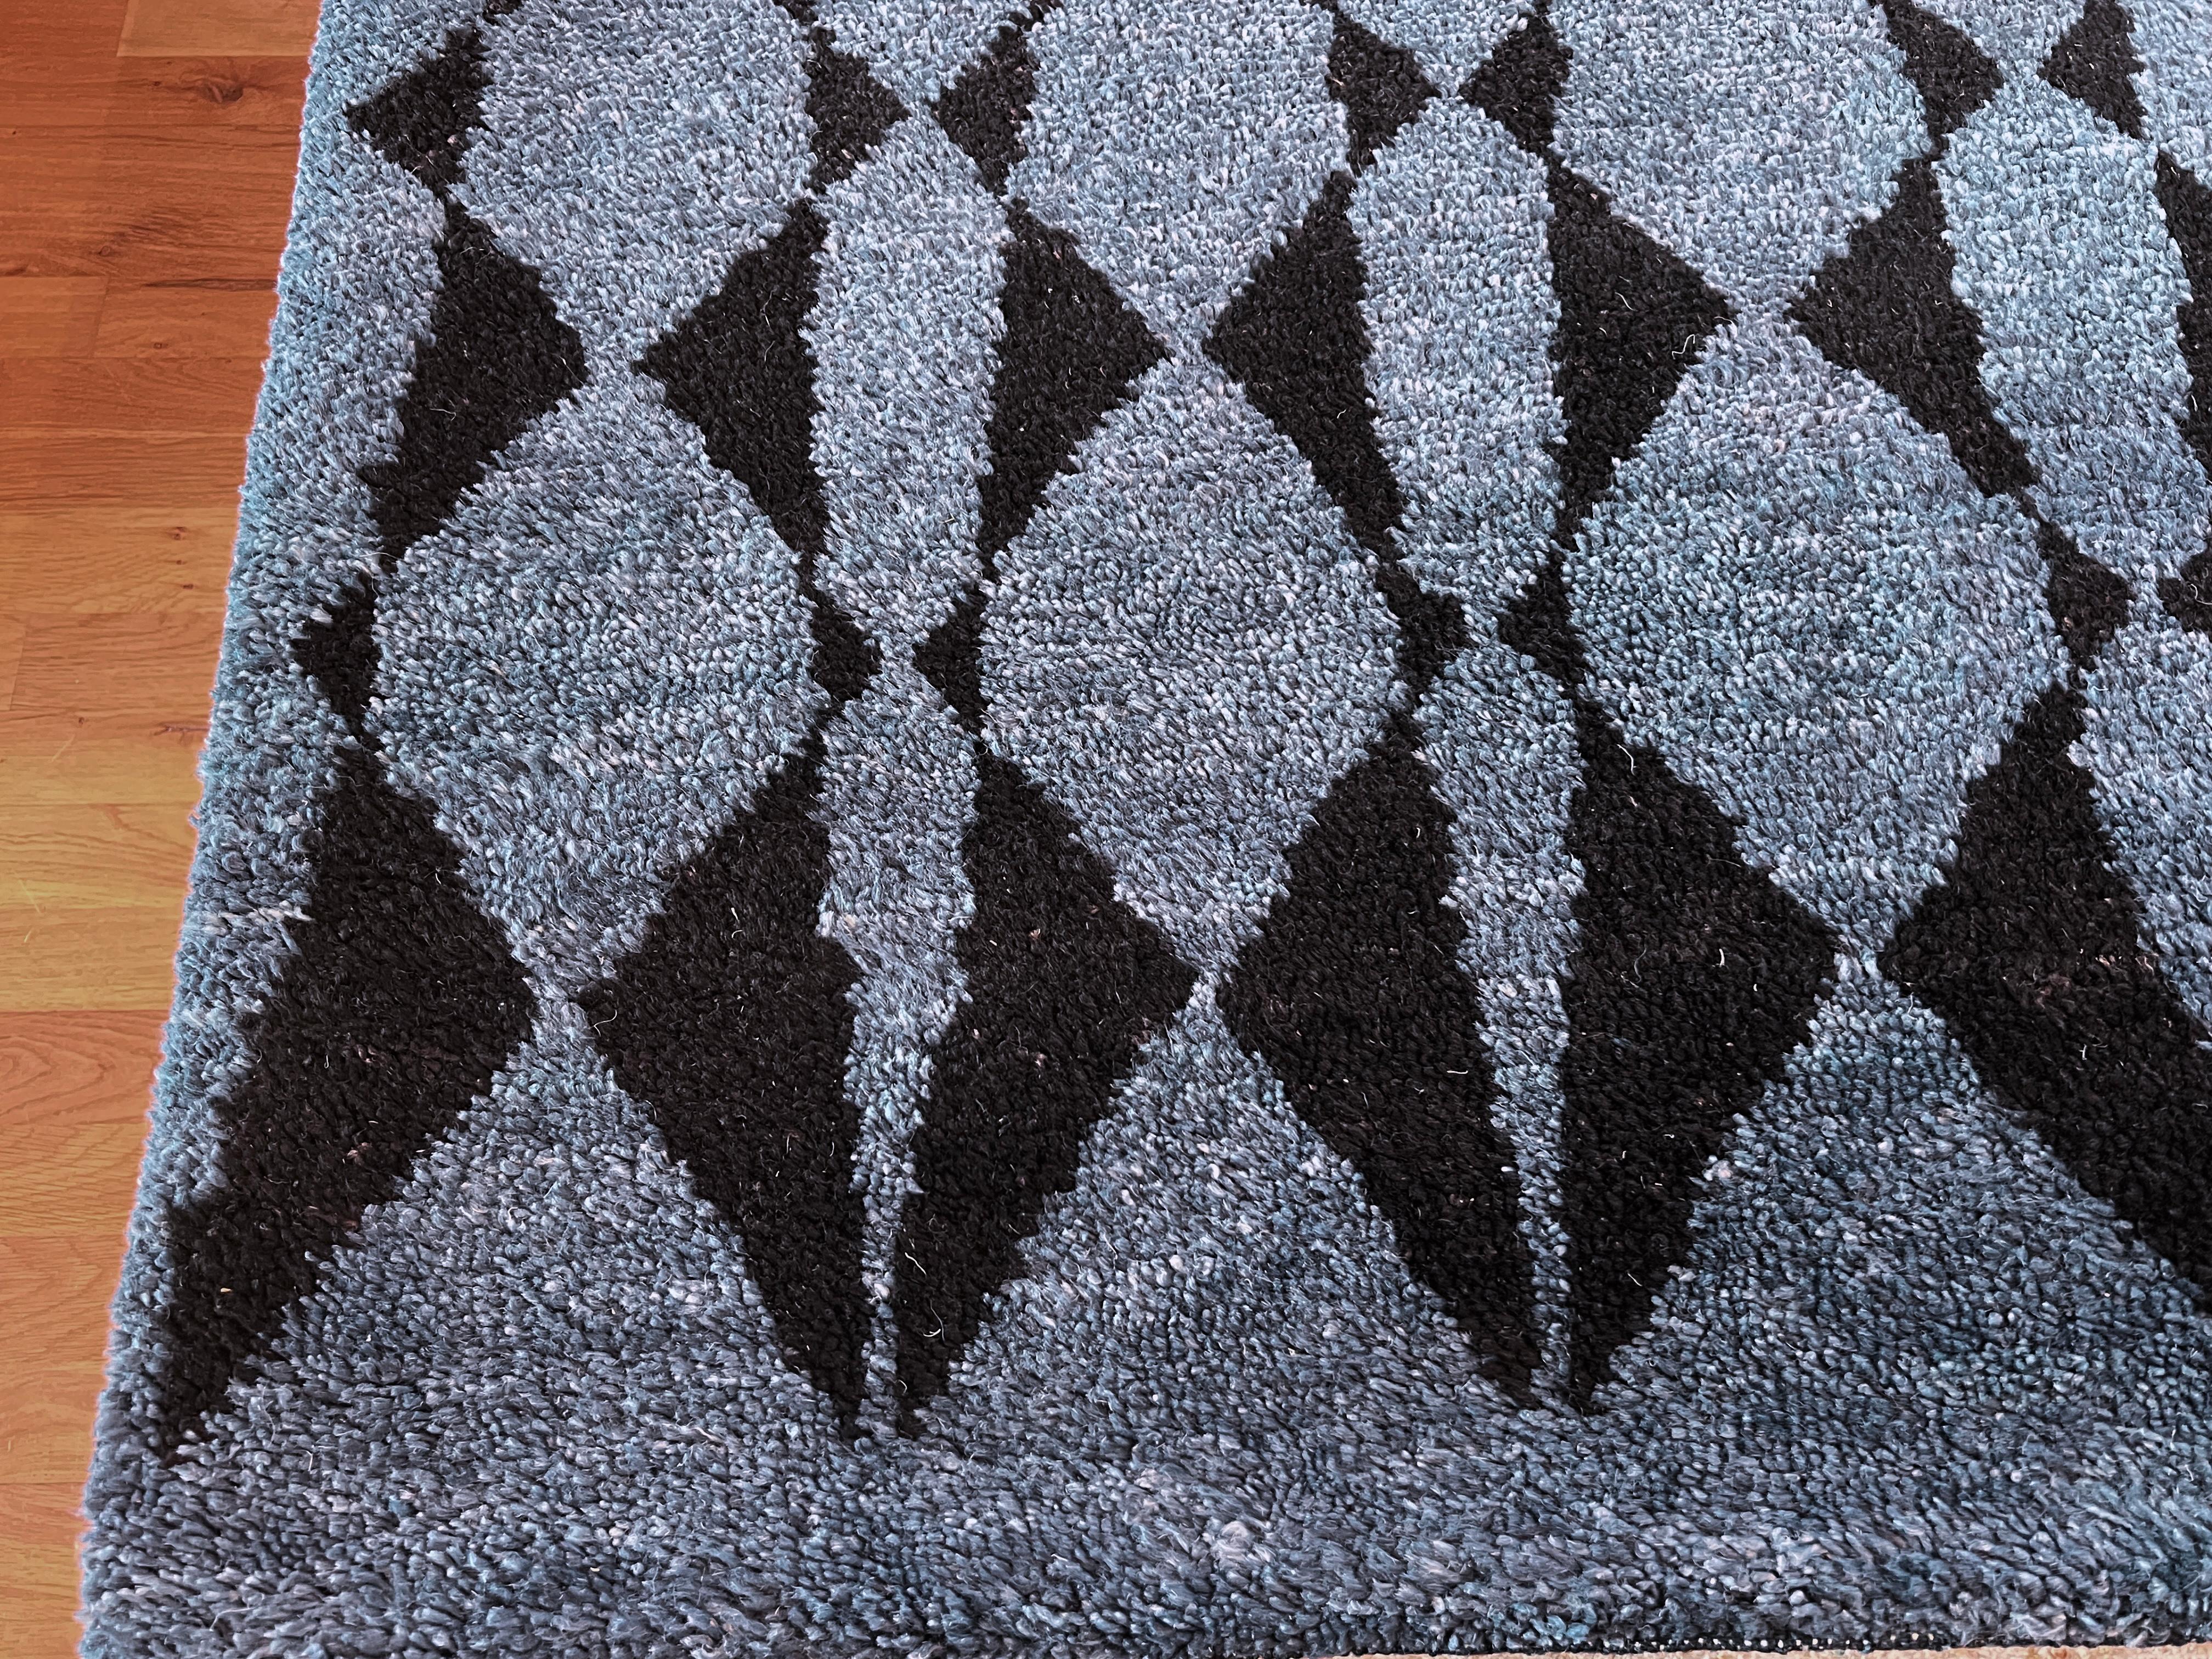 Add a touch of modern, tribal style to your home with our 9'x12' Moroccan rug. The vibrant navy blue background and black diamond accent will make a statement in any room. Soft and durable, this rug is sure to liven up your space and provide warmth